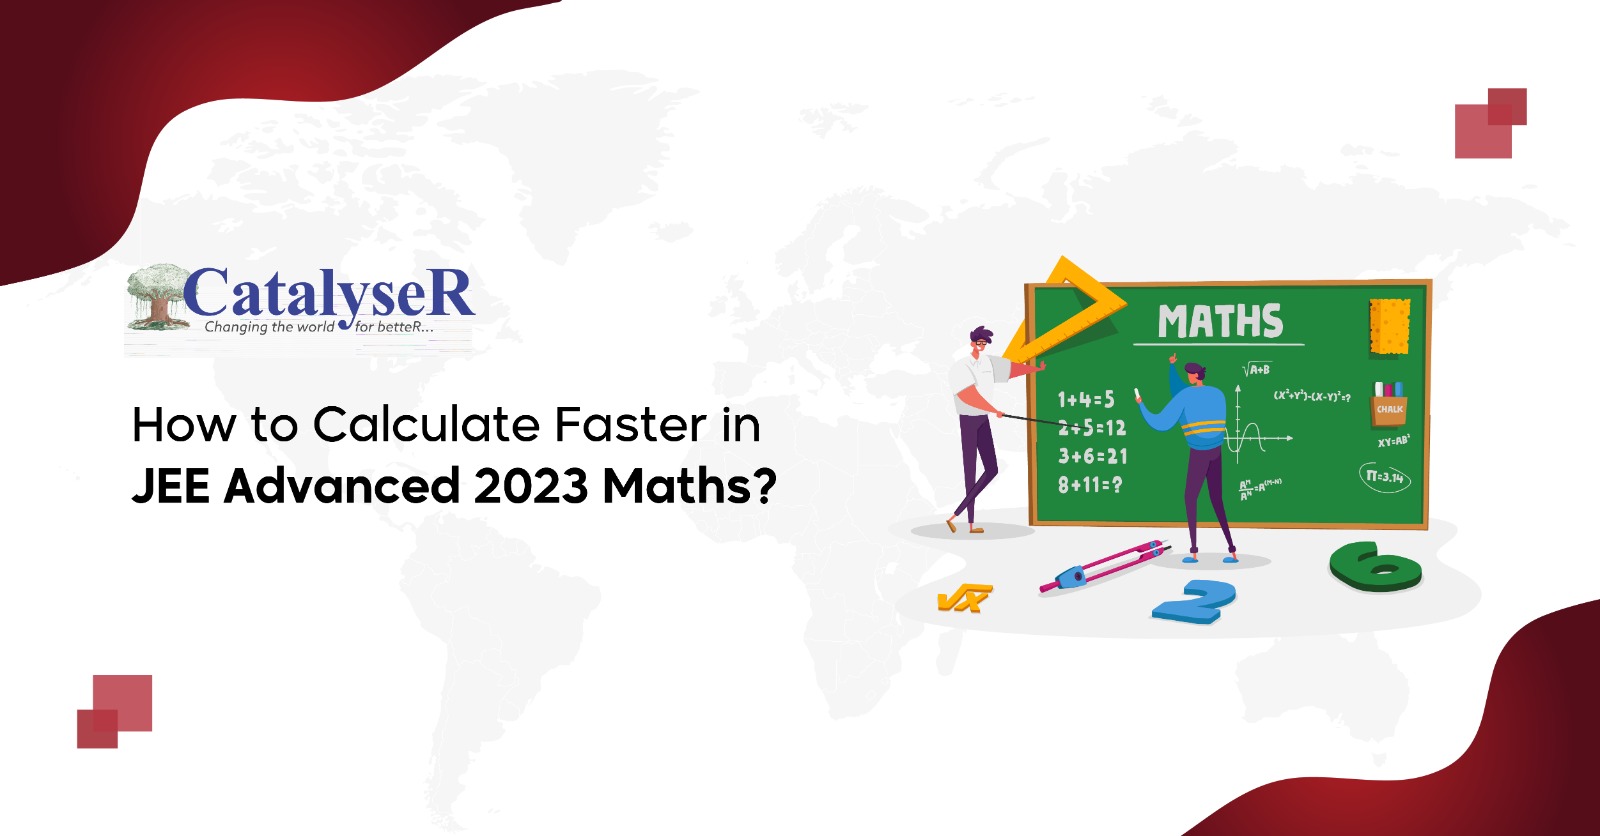 How to Calculate Faster in JEE Advanced 2023 Maths?